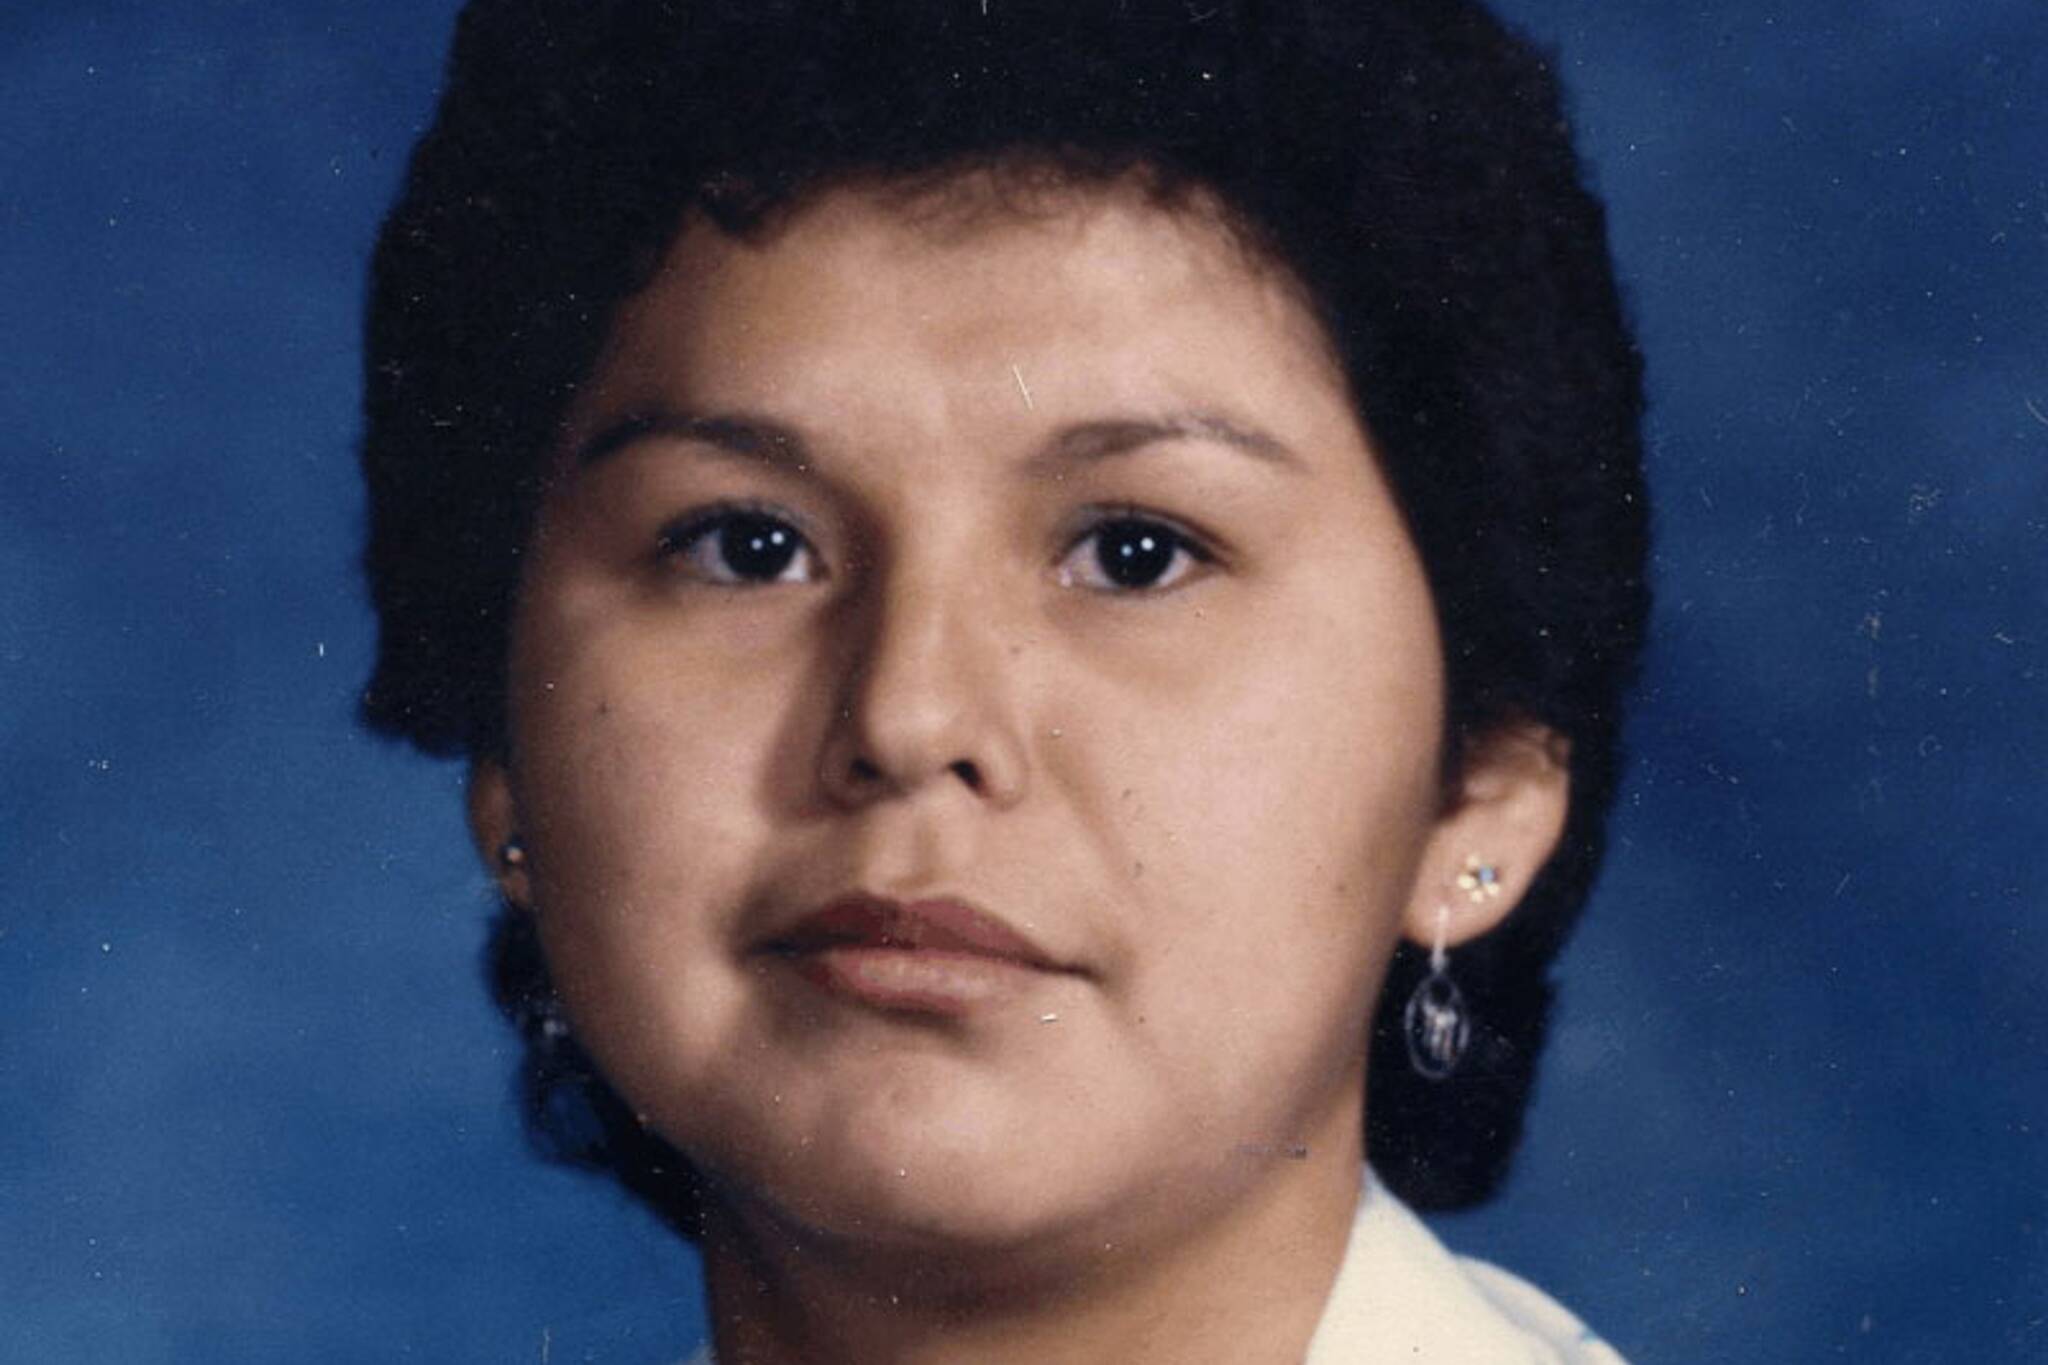 Alberta Williams was murdered 34 years ago at the age of 25. Police and family urge anyone with information to come forward. (RCMP photo)